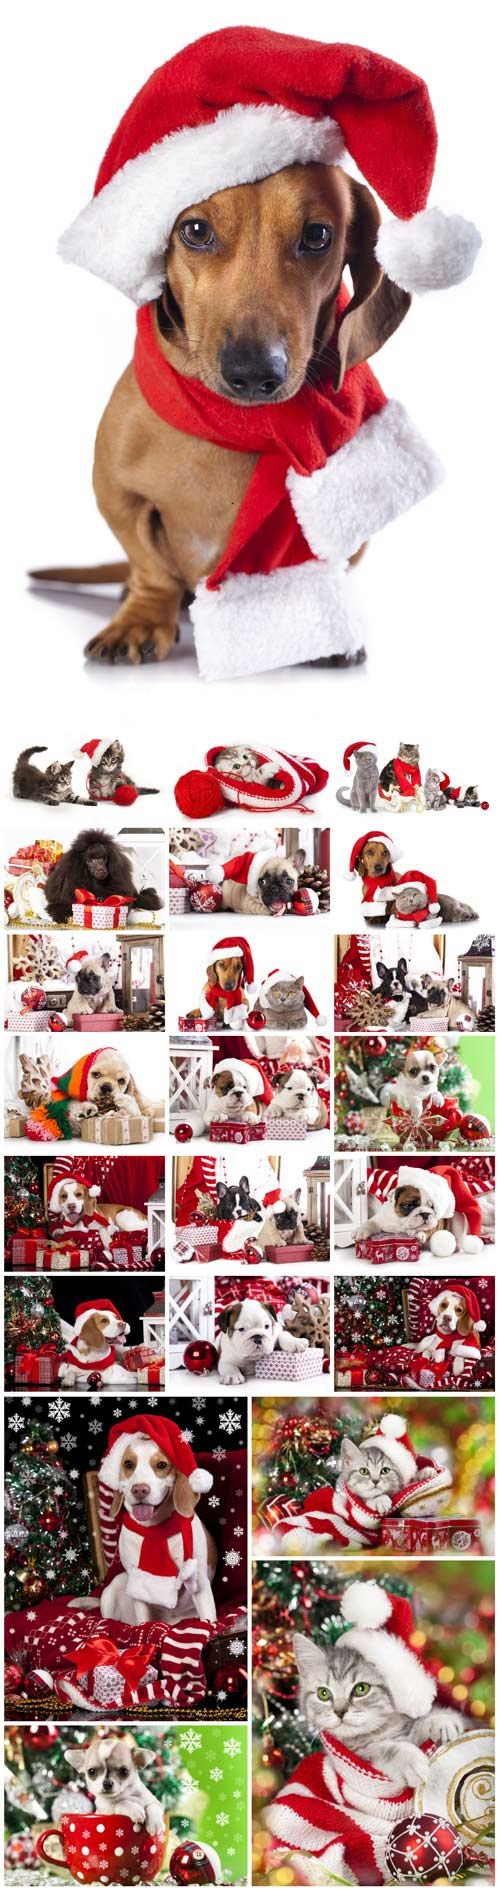 New Year and Christmas stock photos №19